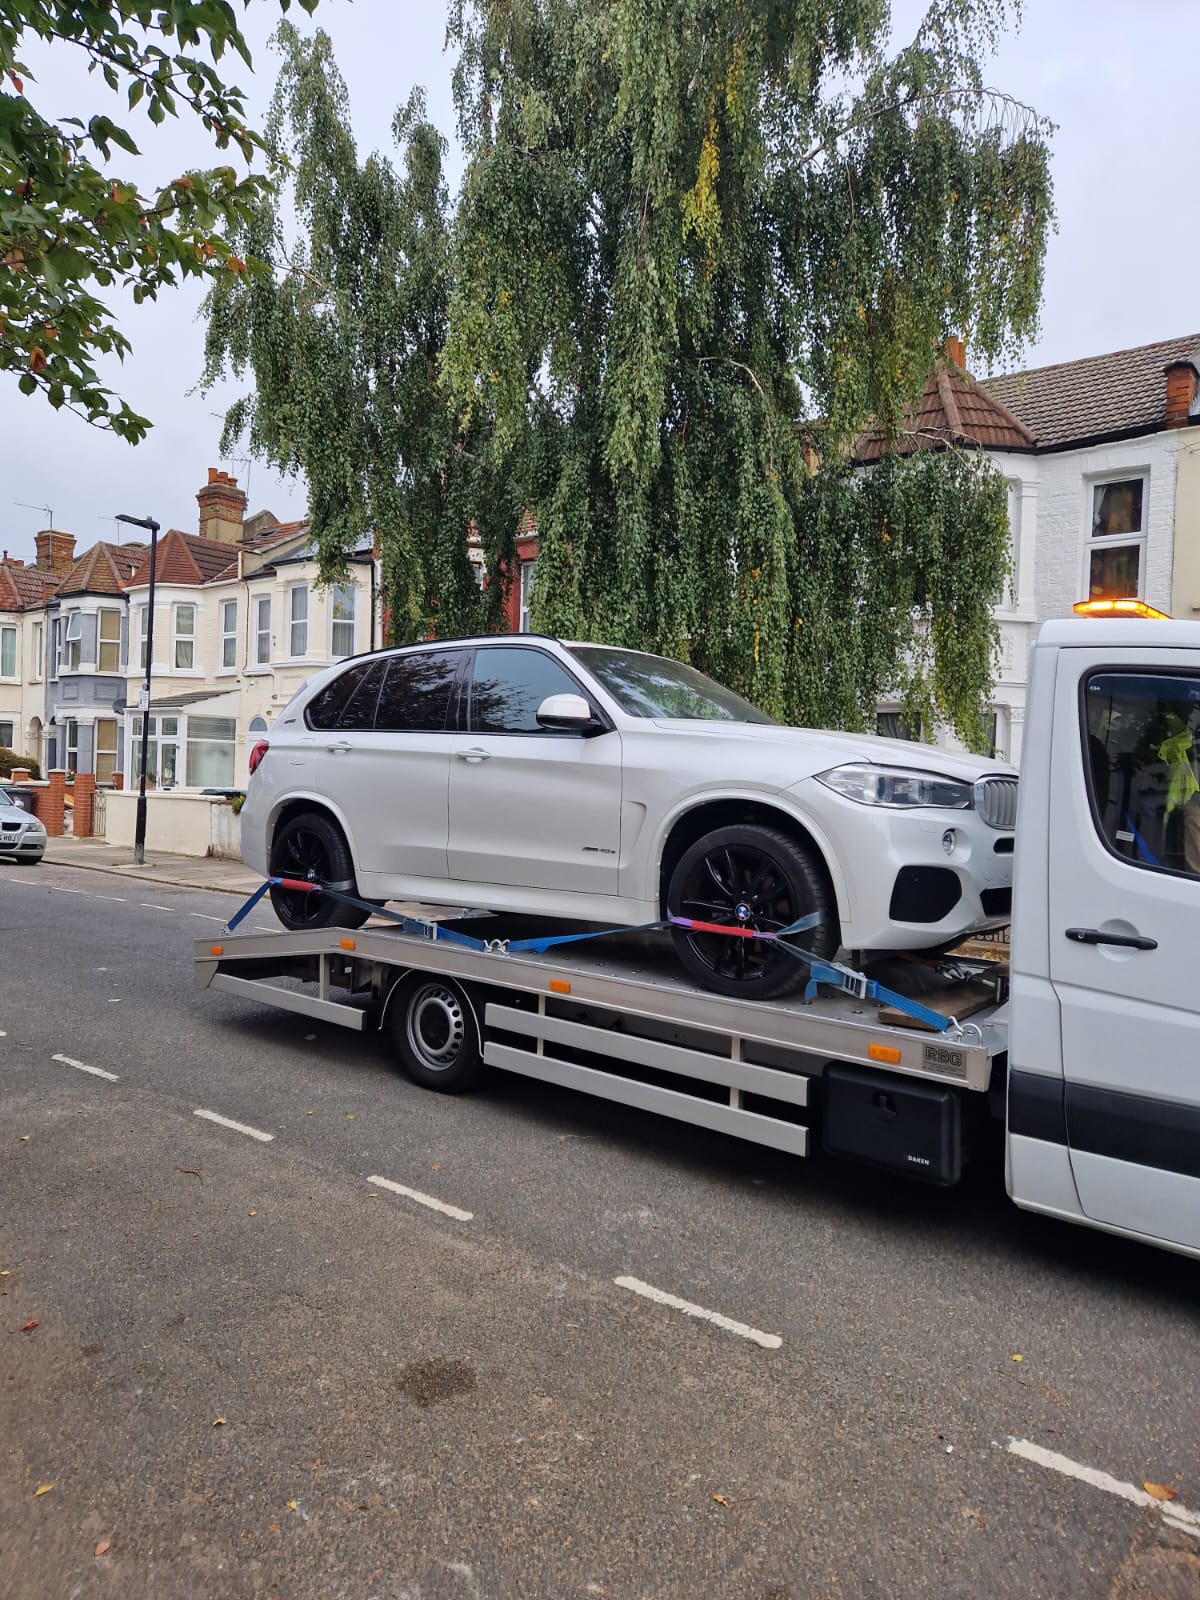 london towy 24 hours car recovery london